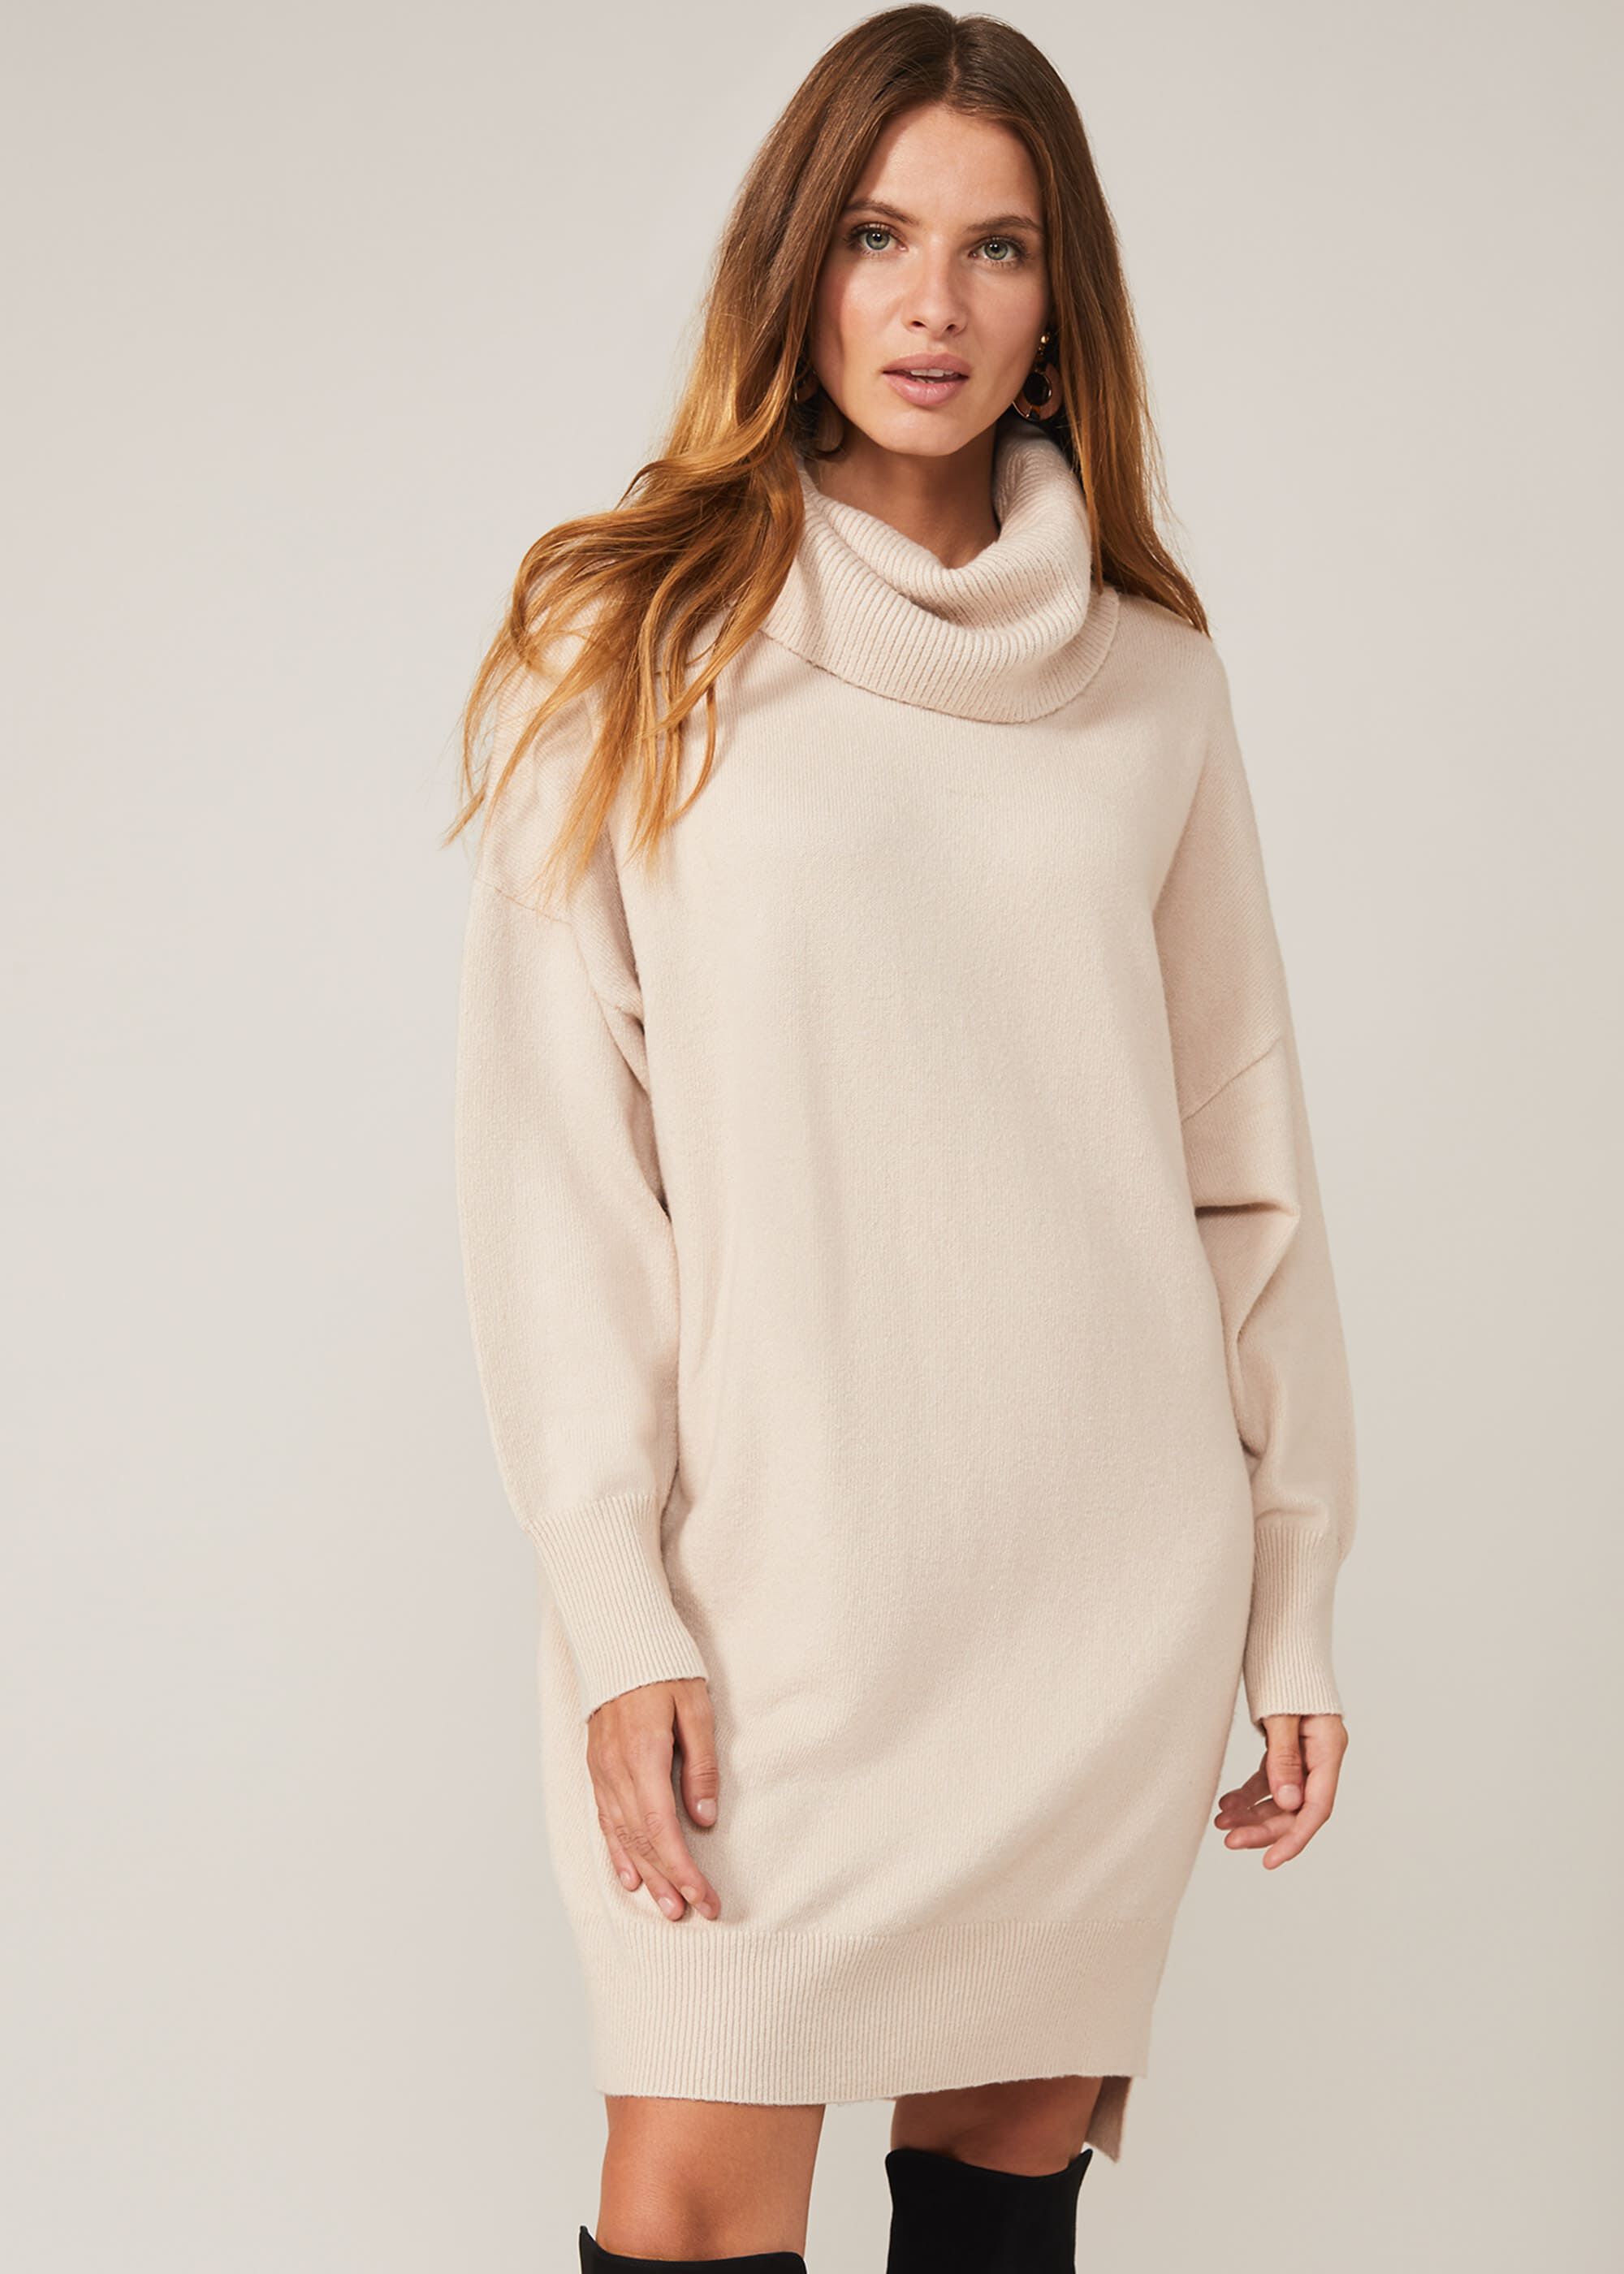 Phase Eight Knitted Dresses Sale Online, SAVE 33% - horiconphoenix.com